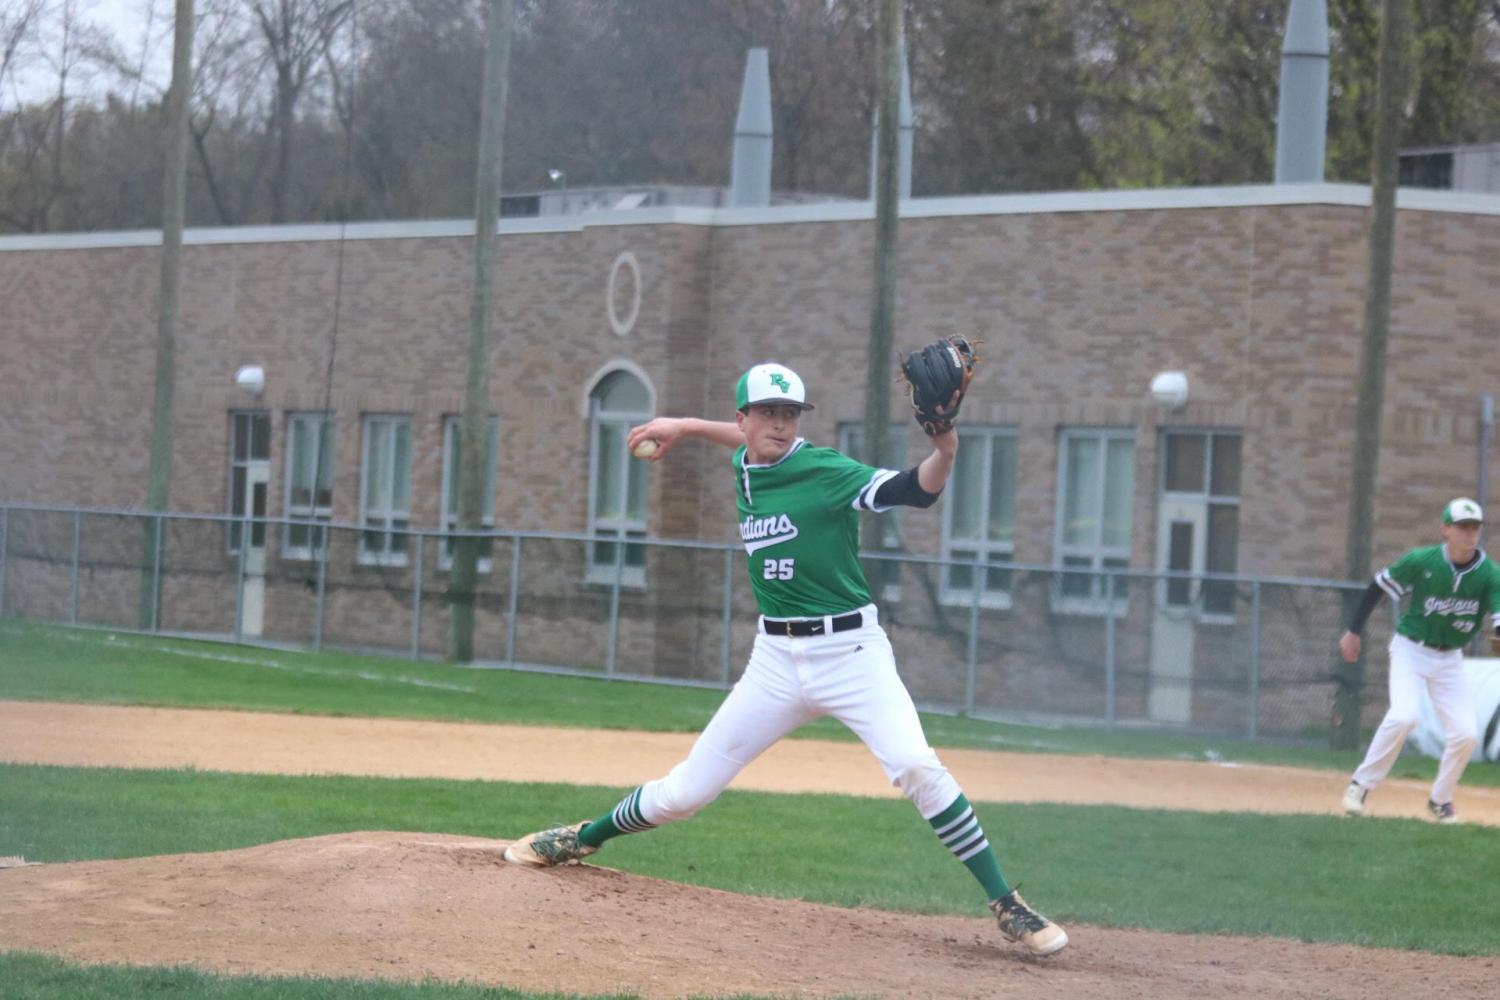 Riley+Weis+started+for+PV+against+St.+Joes+and+surrendered+just+three+hits+in+three+innings+of+work+as+the+Indians+knocked+off+New+Jerseys+No.+1+team.%2C+St.+Josephs+Regional.